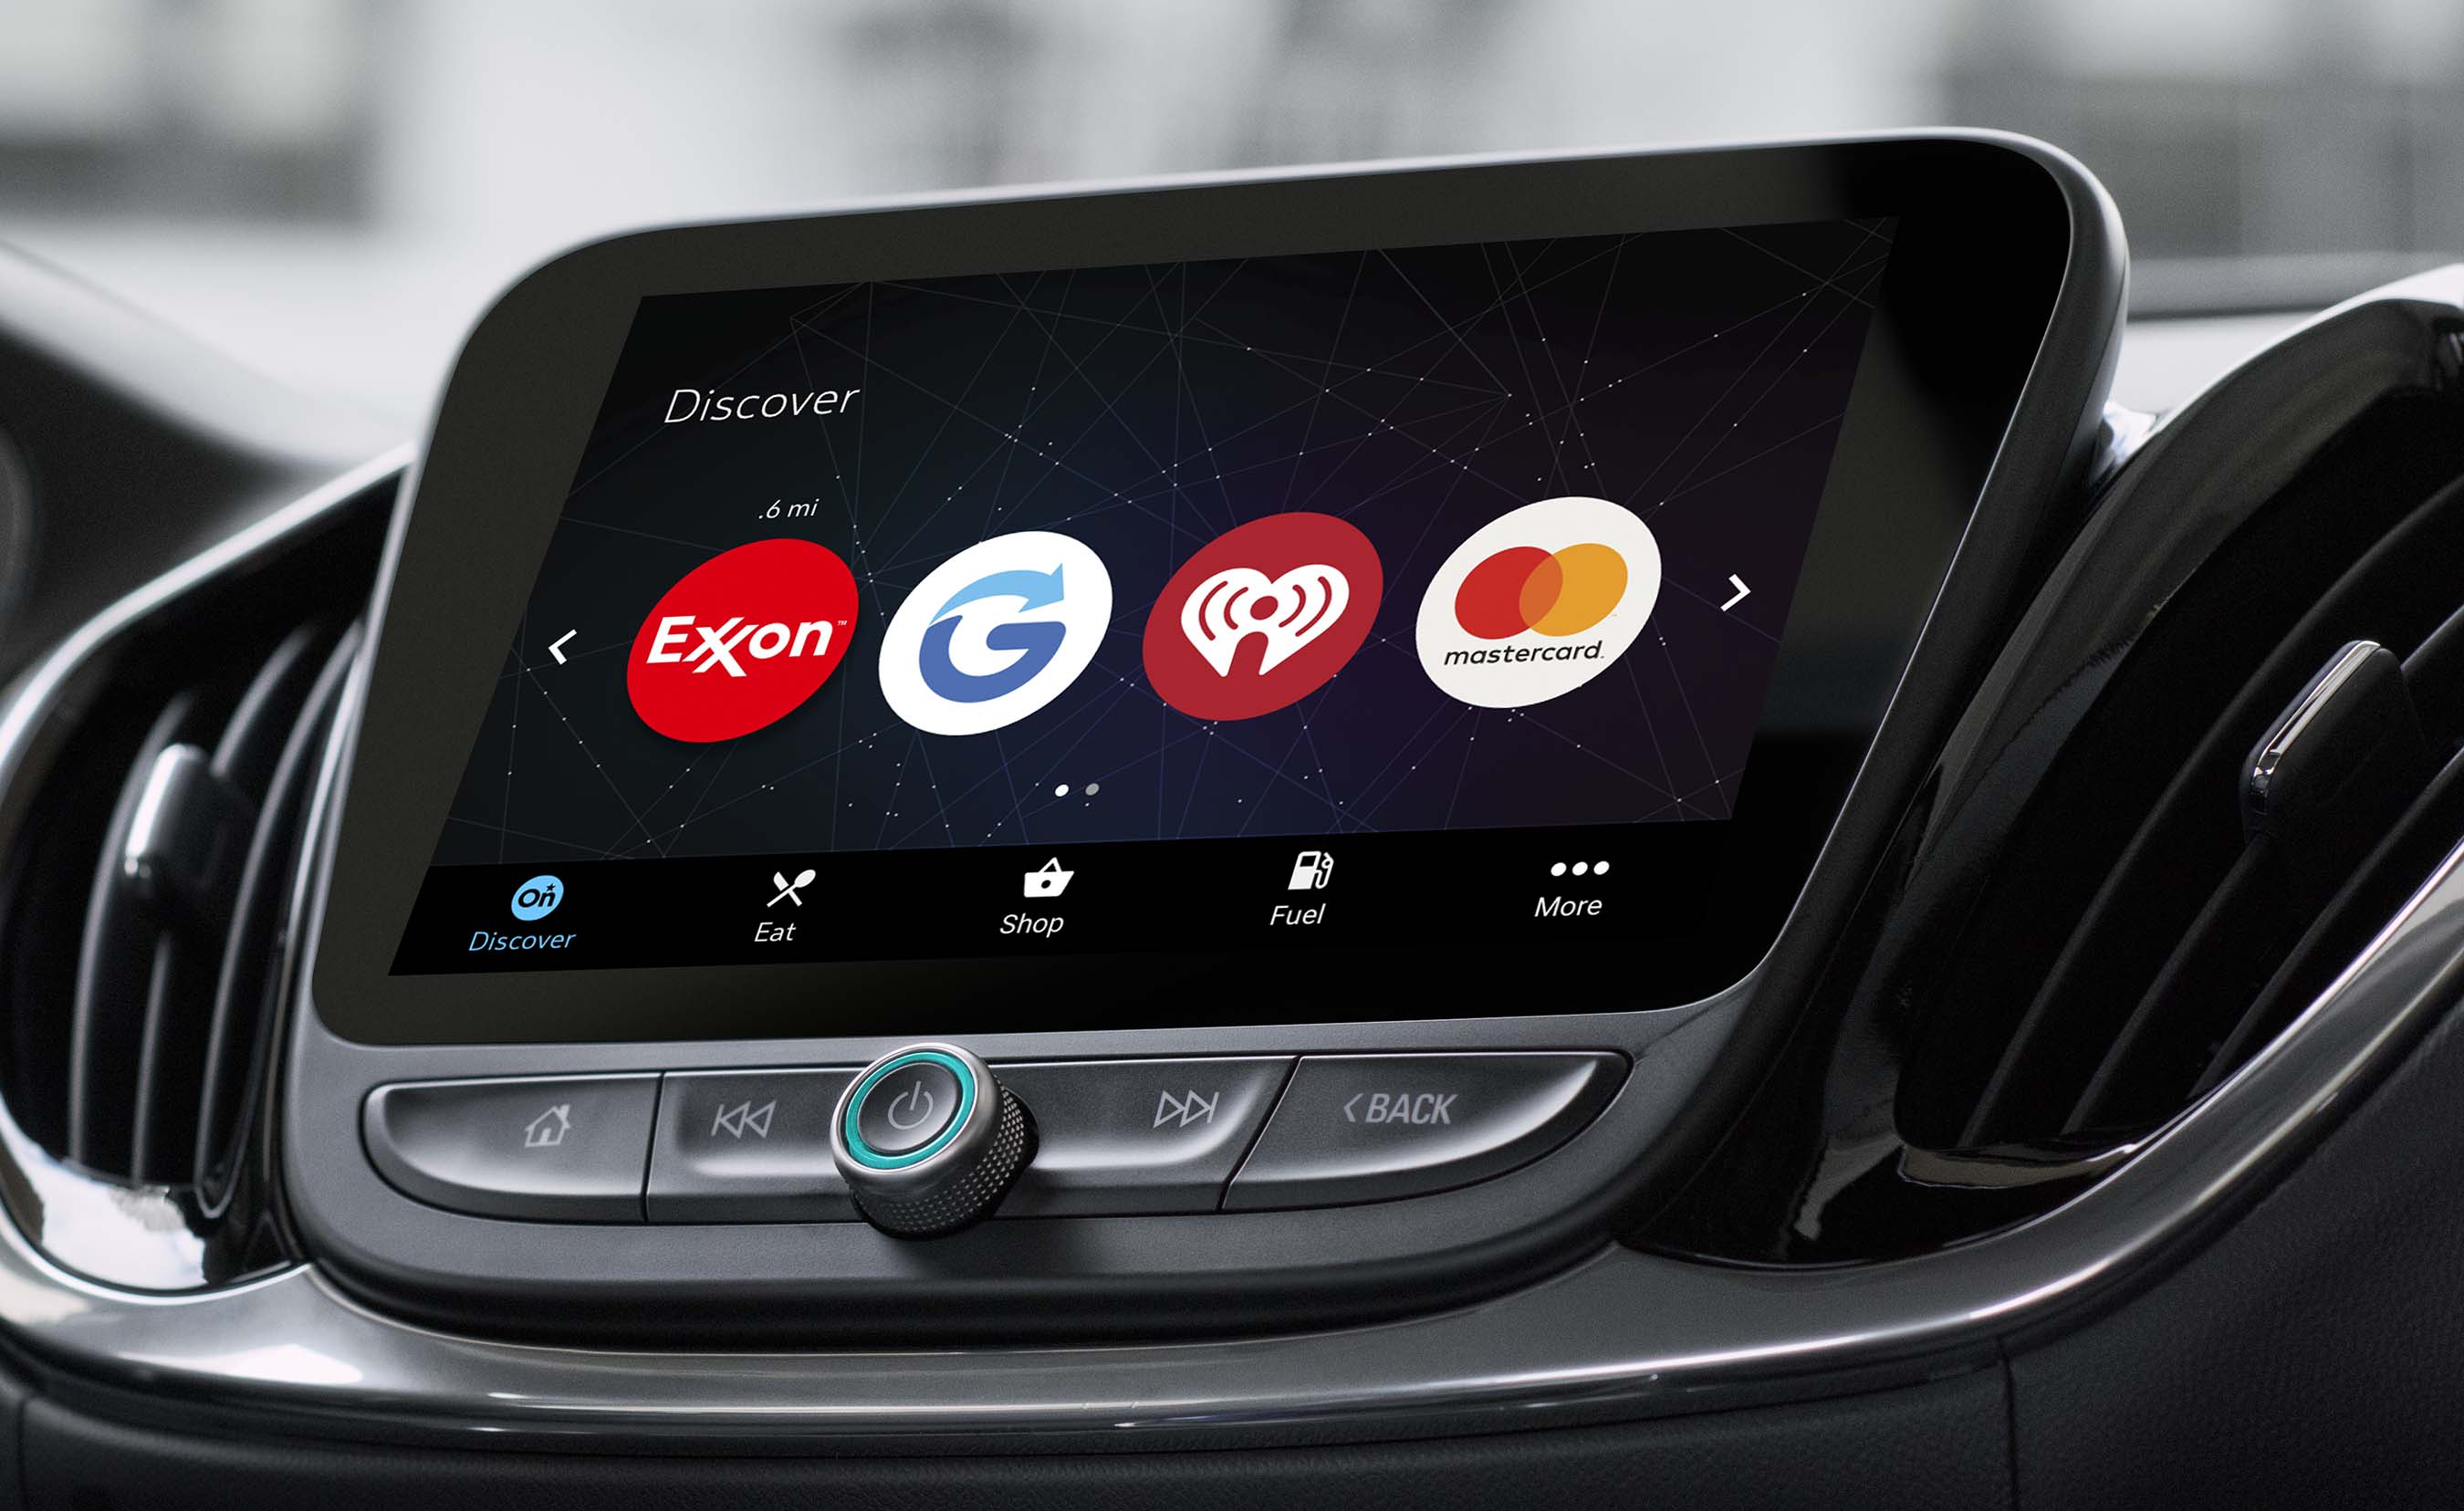 The auto industry’s first cognitive mobility platform to connect drivers and passengers with brands such as ExxonMobil, Glympse, iHeartRadio, Mastercard and Parkopedia #OnStarMeetsWatson #ibmwow